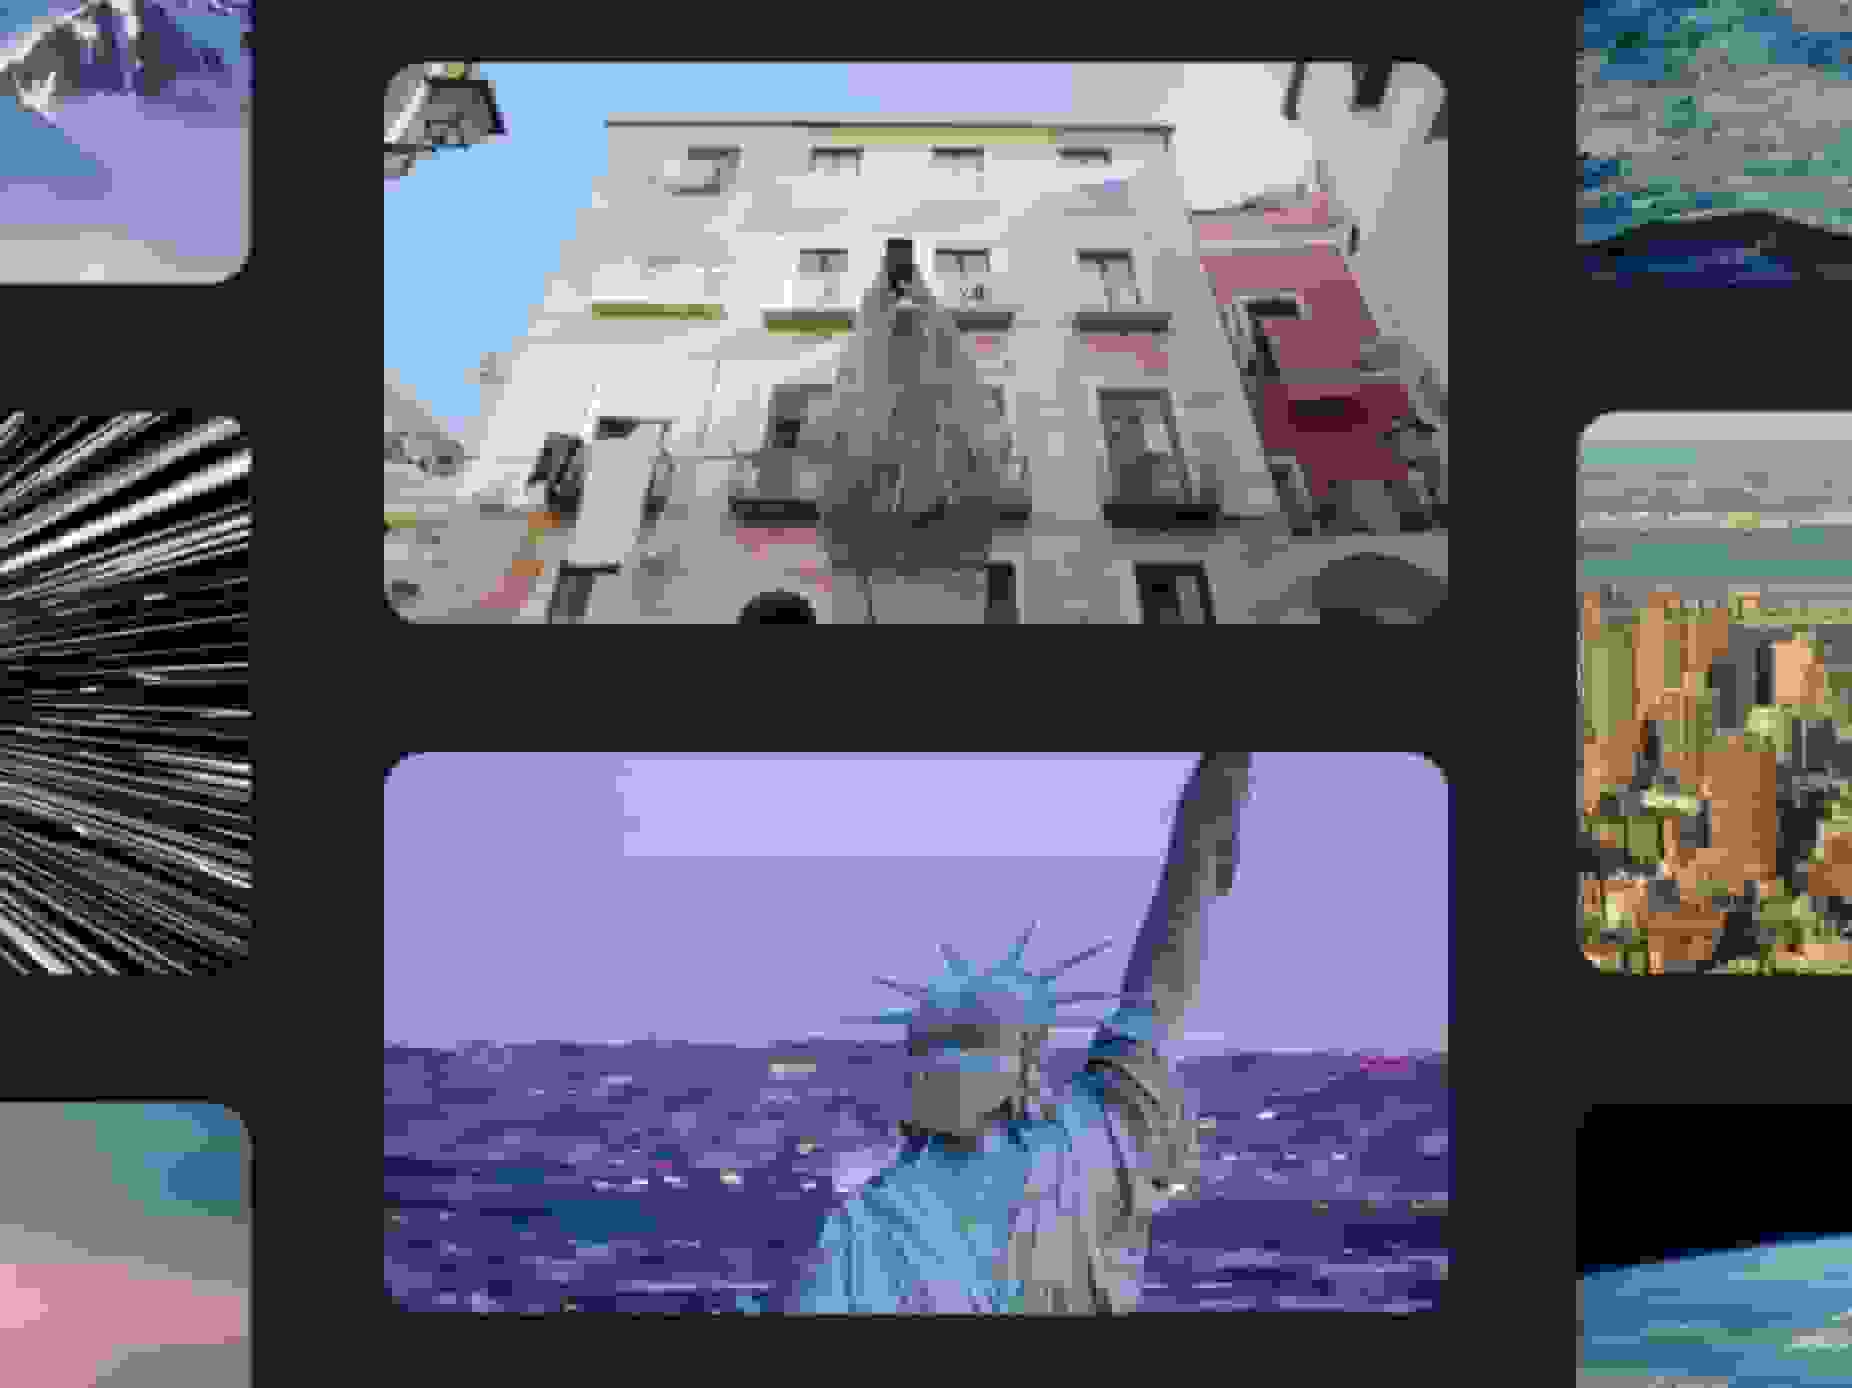 Vimeo stock images and footage of New York City